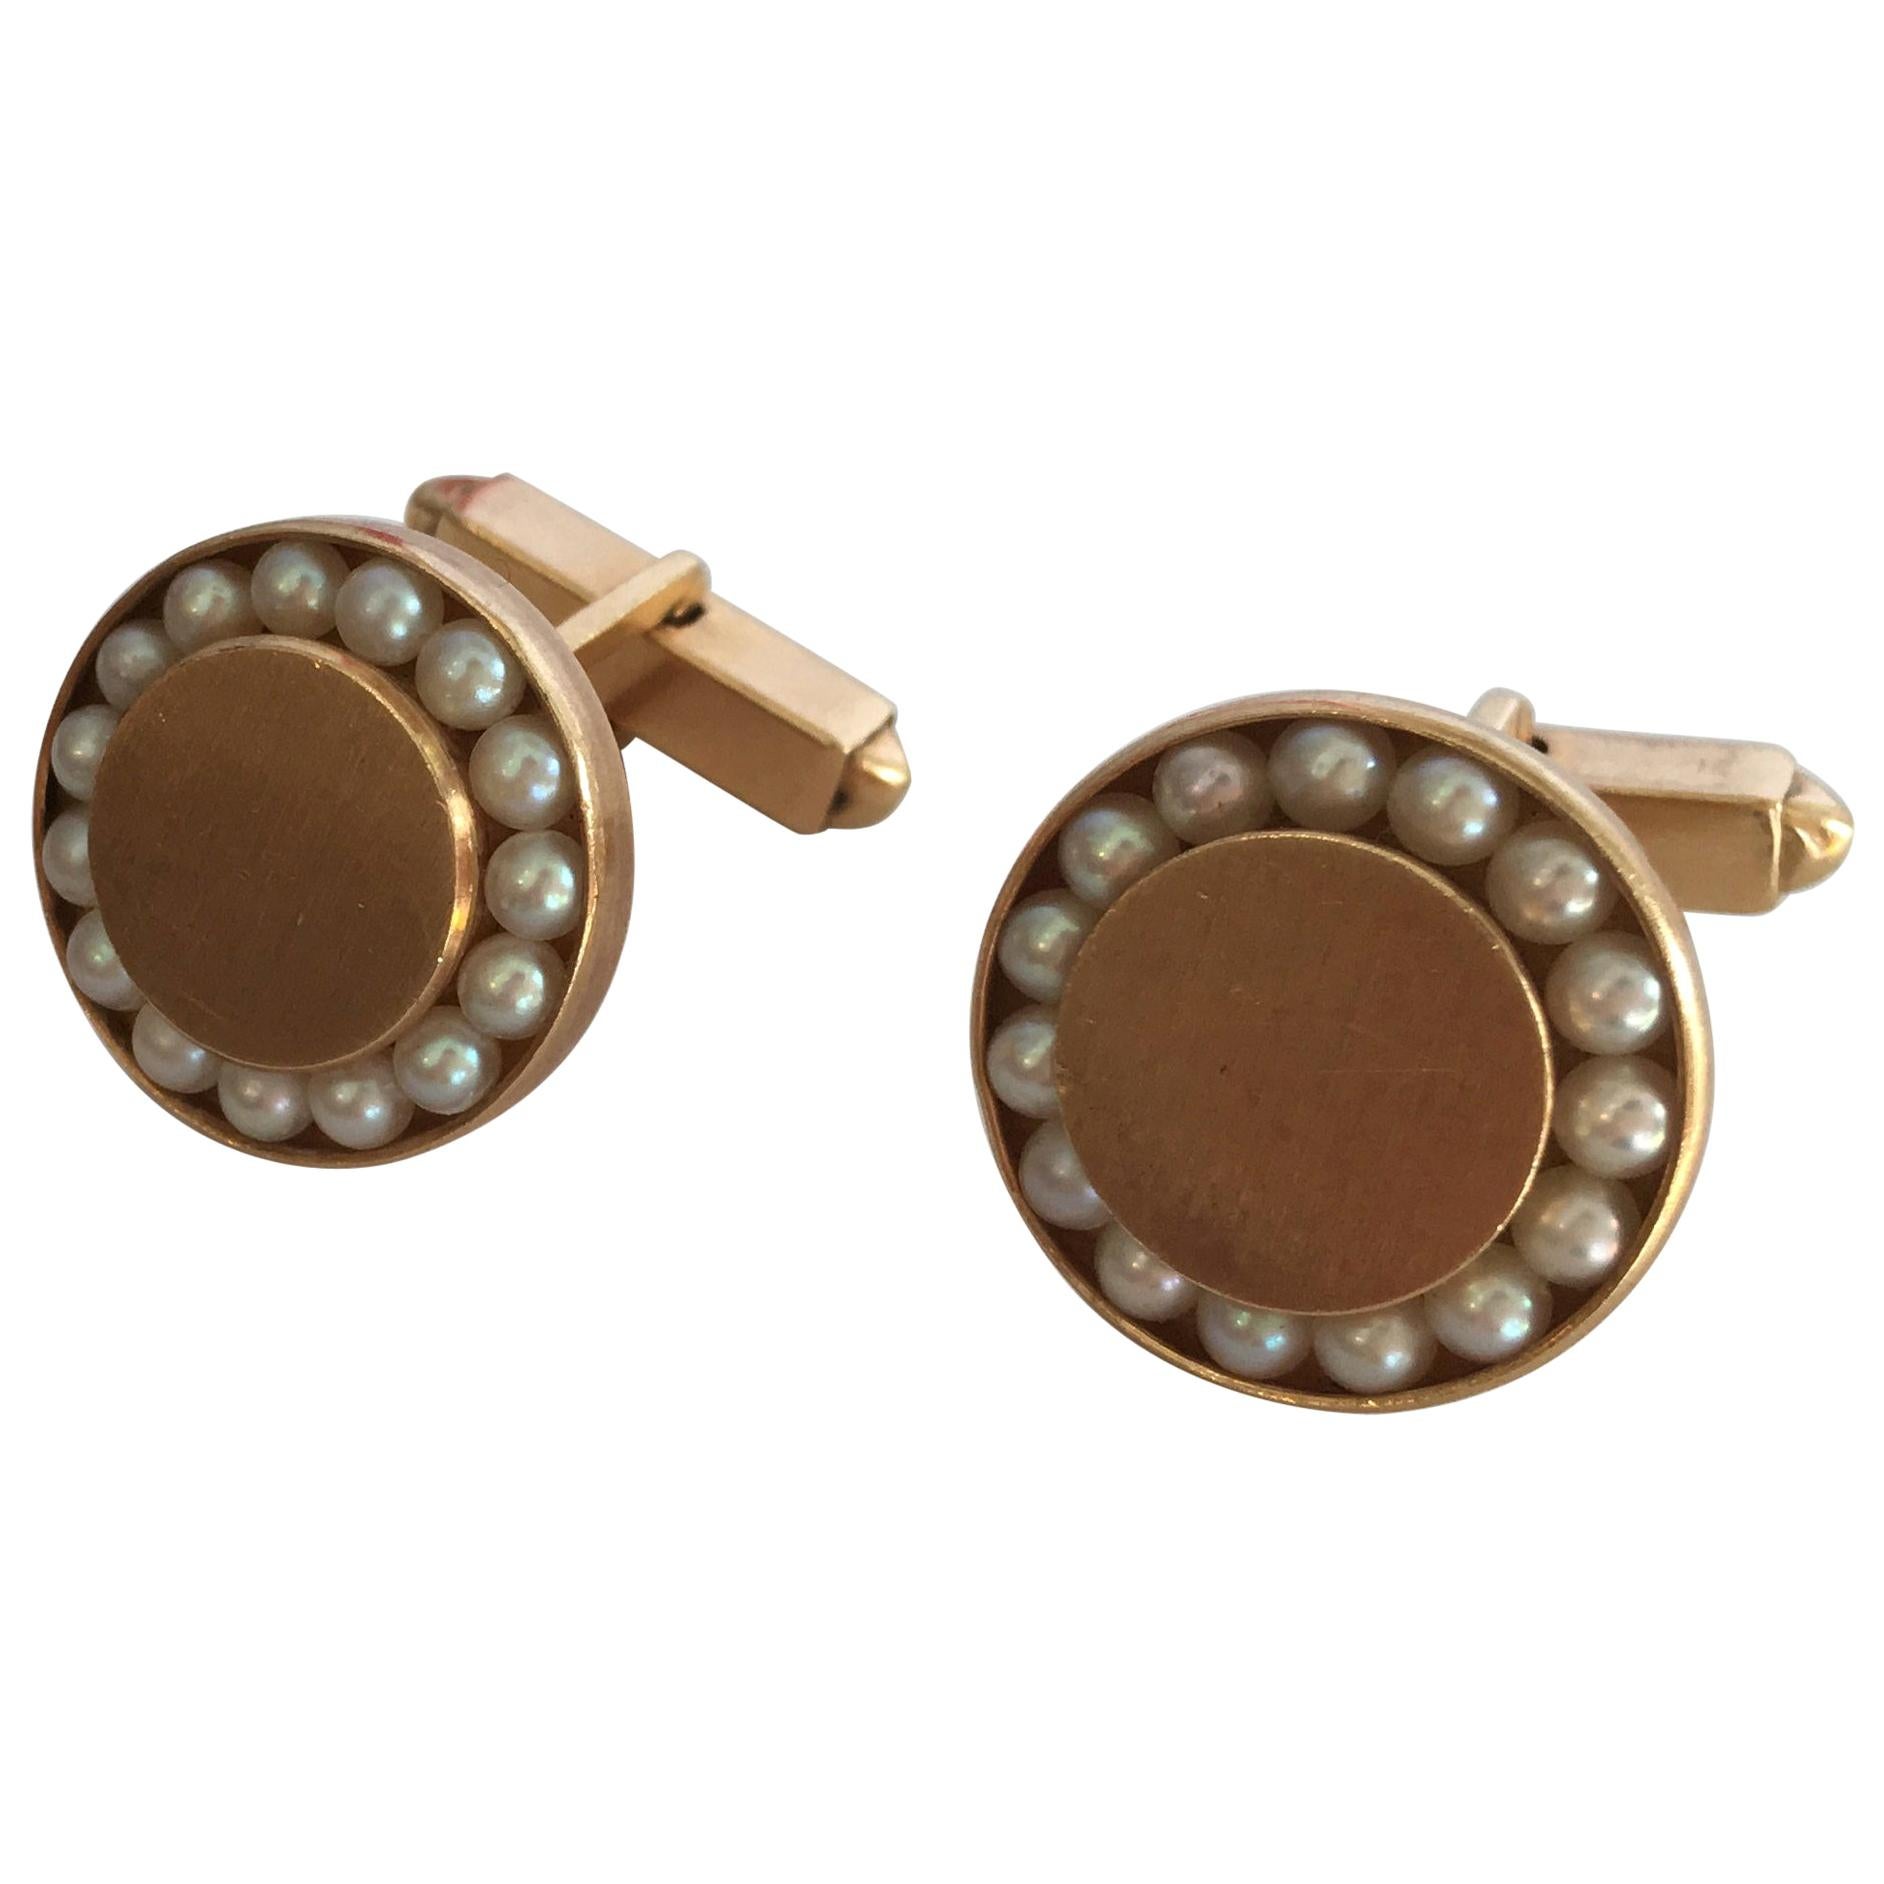 Round 14-Karat Pearl Cufflinks with Bullet Back Clasp and Lapel Pin